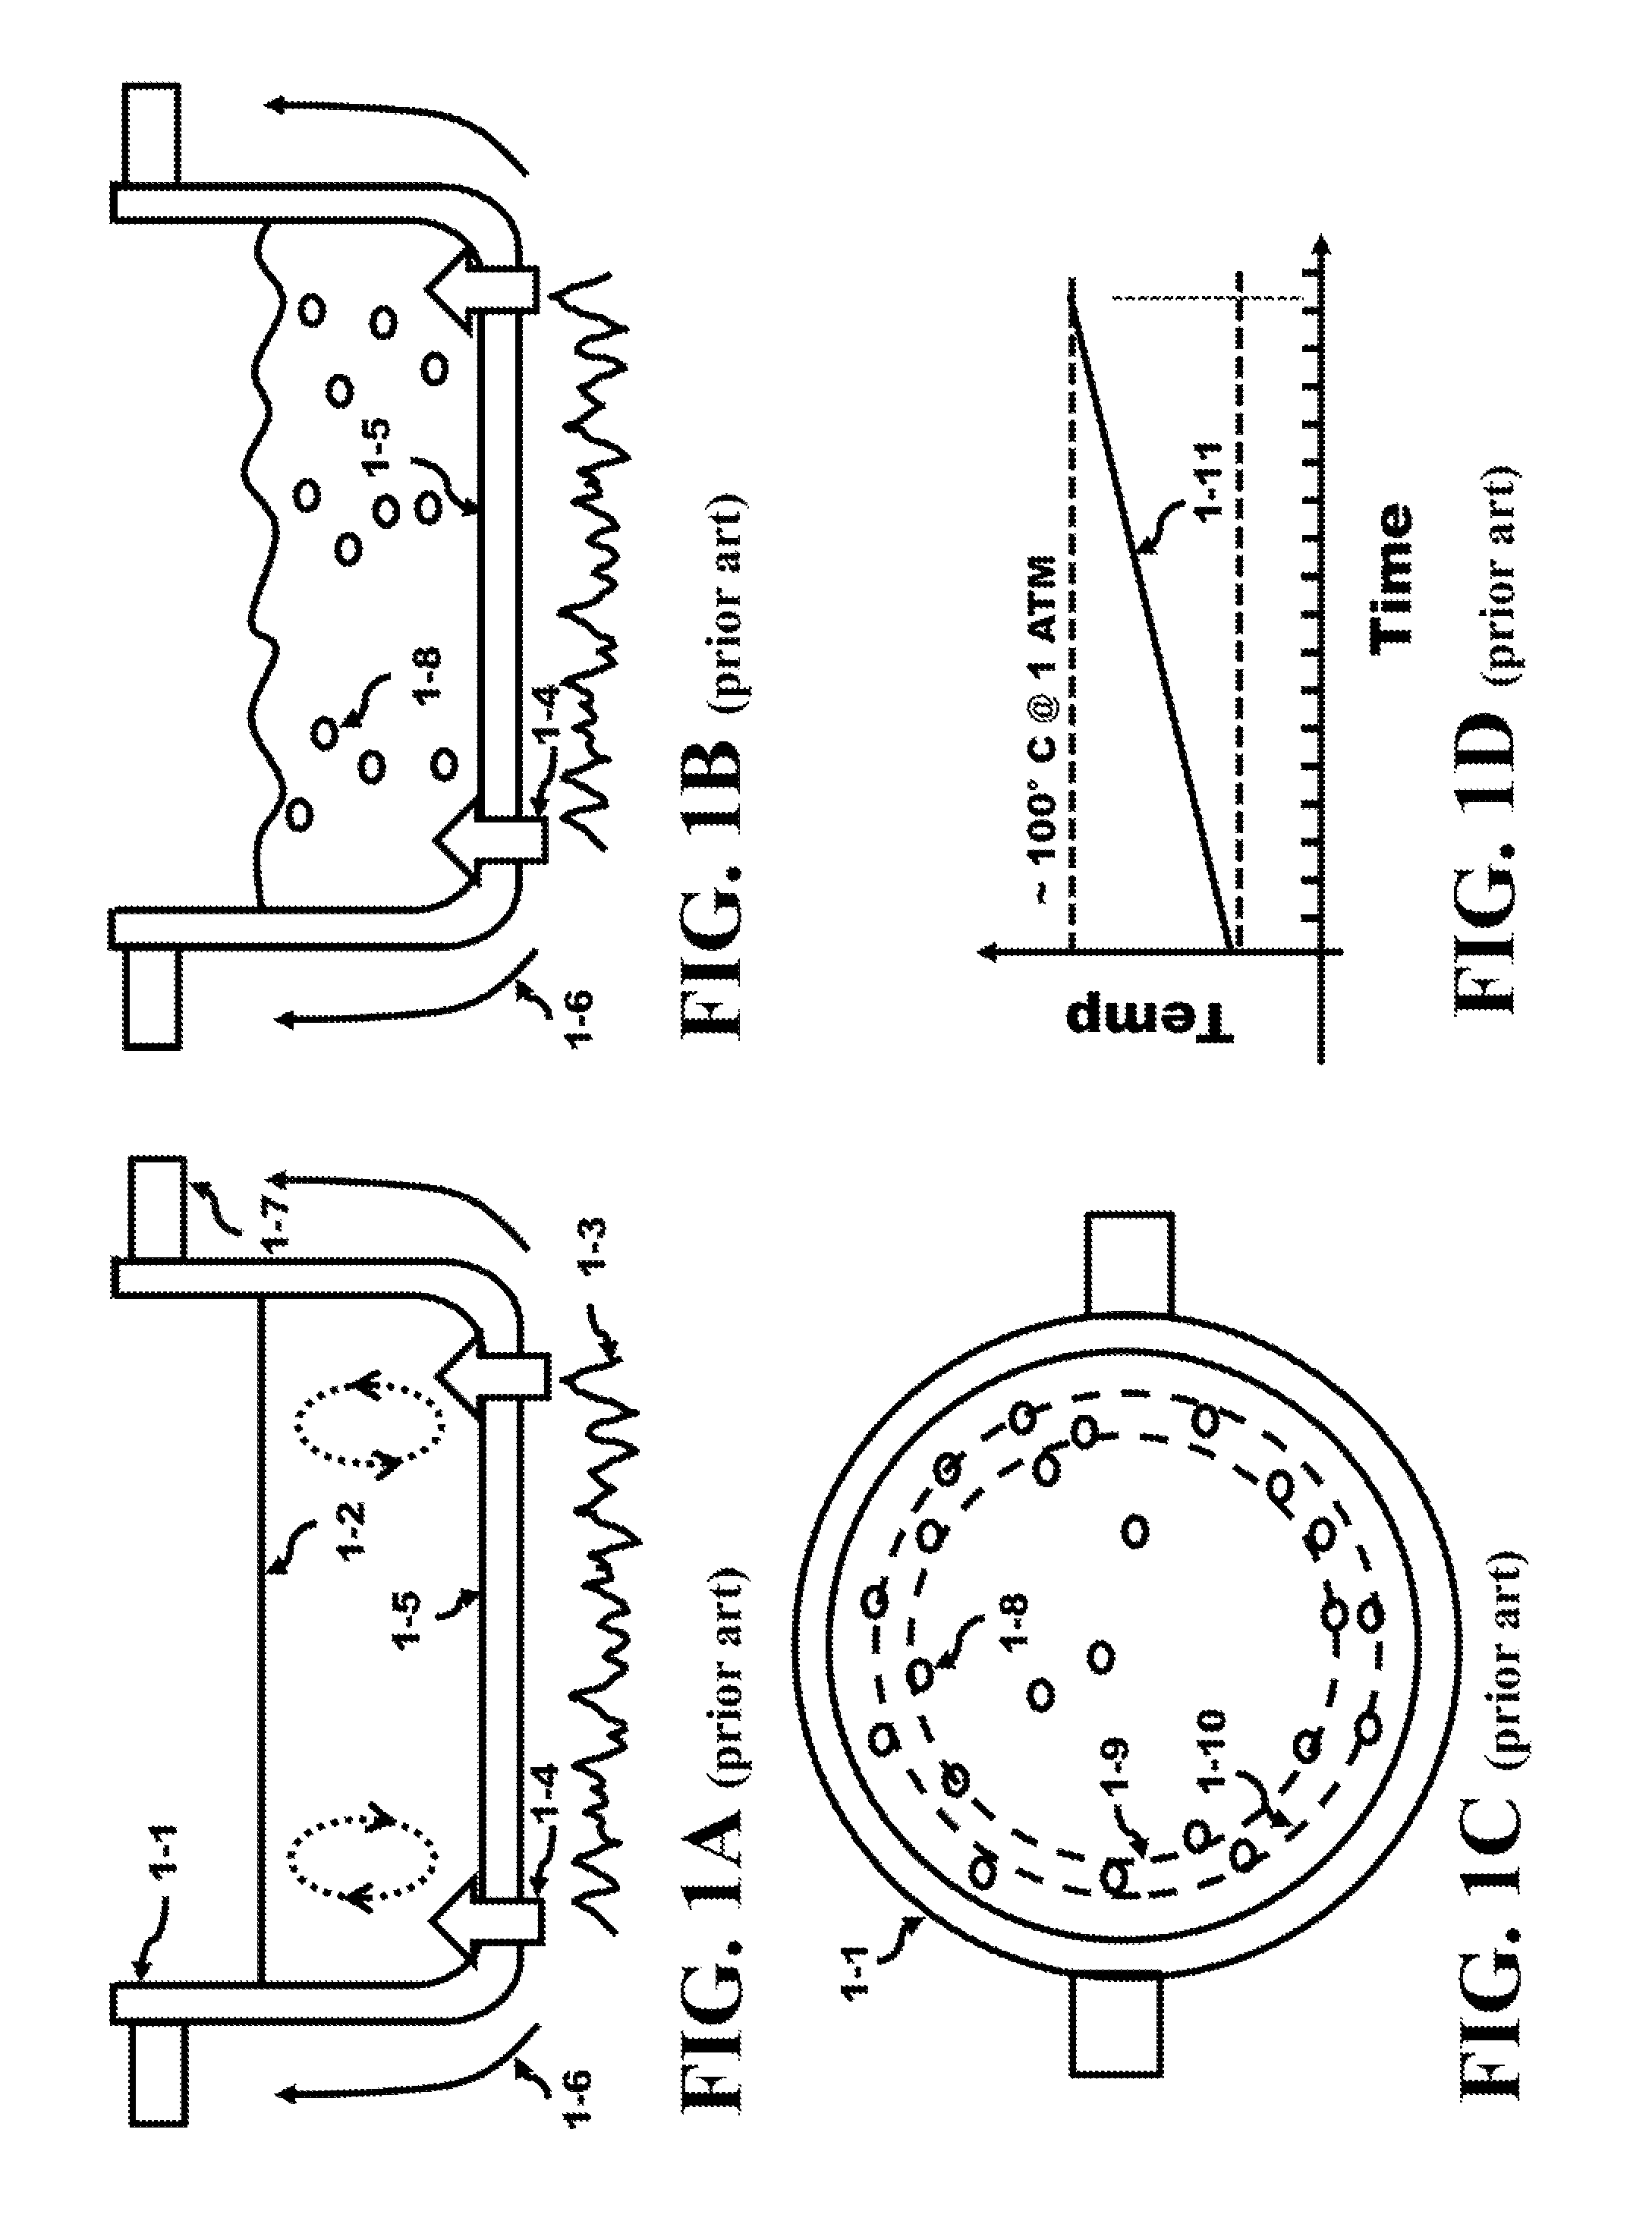 Method and apparatus for quickly cooking comestibles